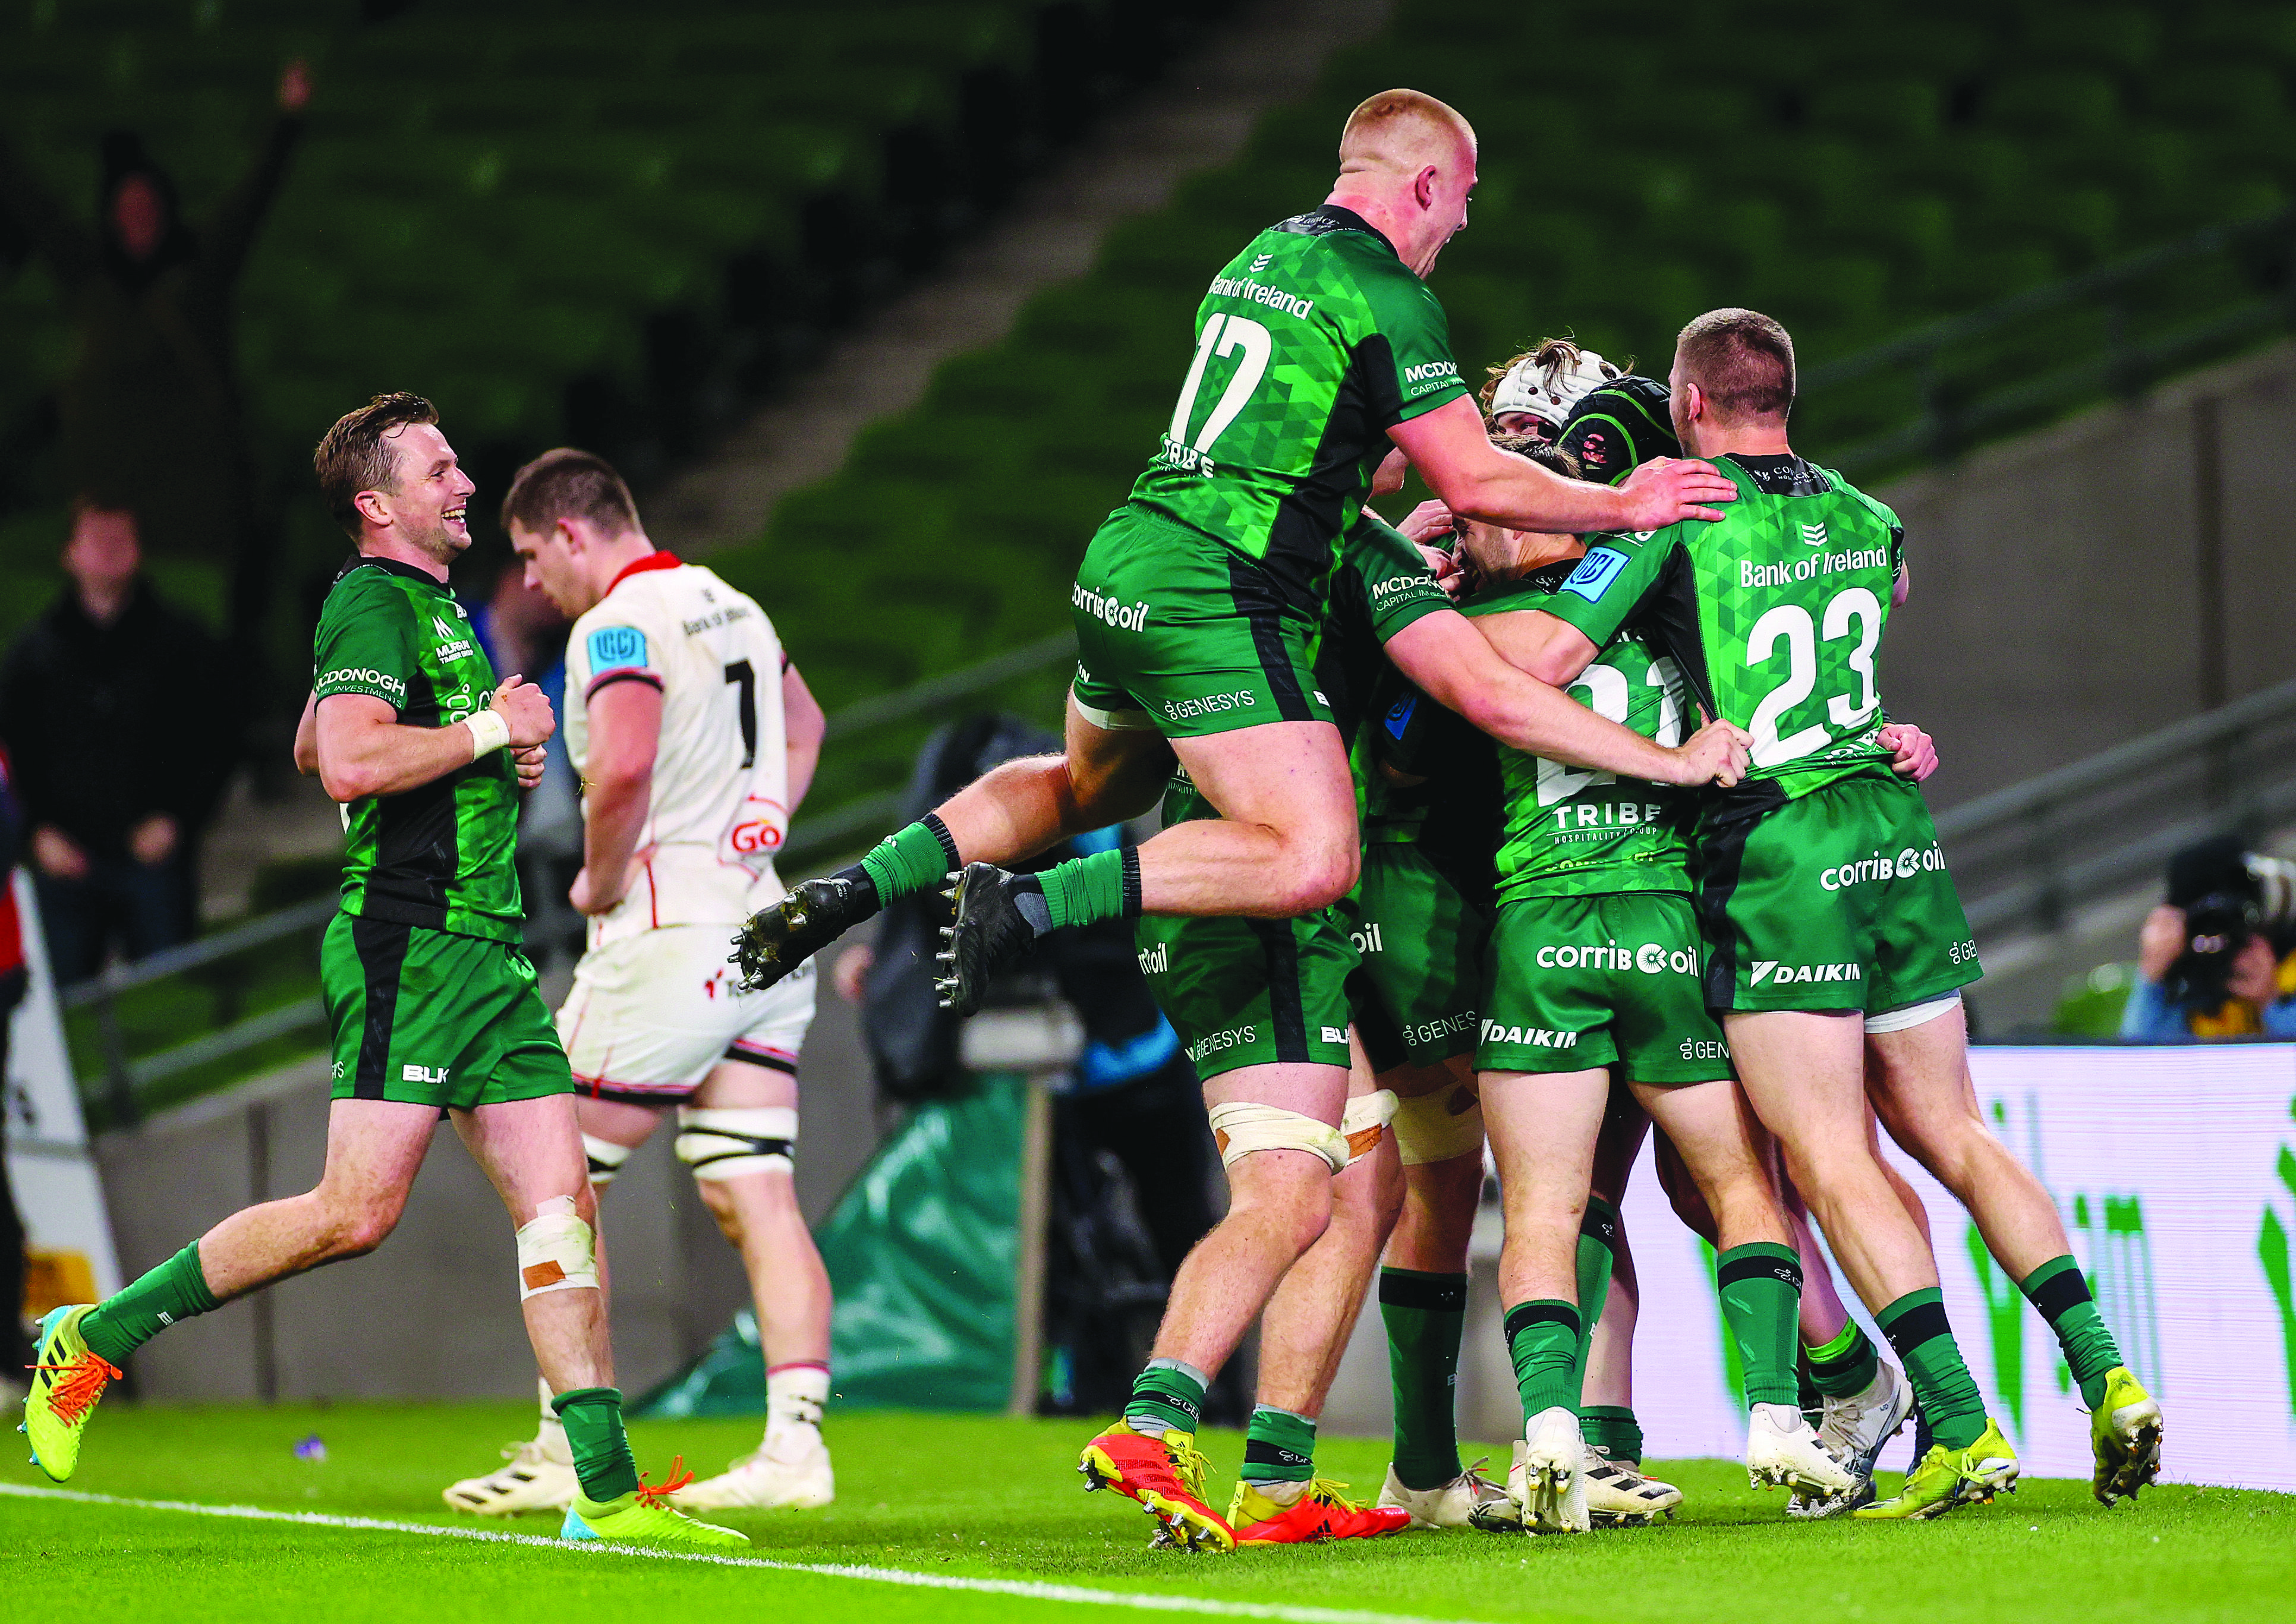 Connacht were celebrating at the Aviva Stadium in October when they won the corresponding fixture 36-11, but Ulster assistant coach Dan Soper believes they have learnt the lessons ahead of Friday’s return fixture at Ravenhill